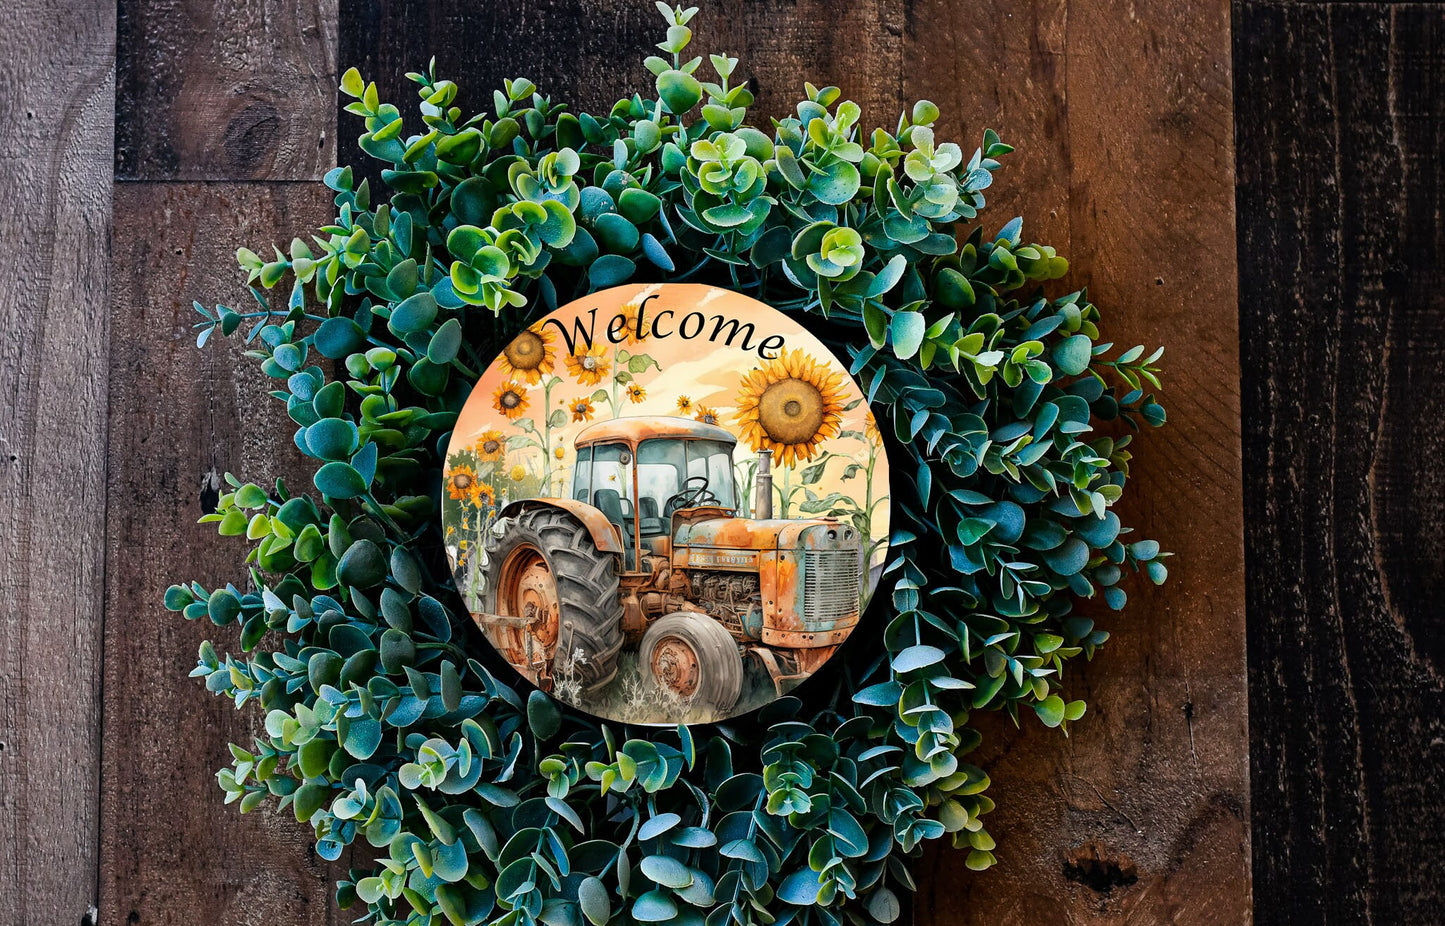 New Release Welcome Tractor and Sunflowers Sign, Farmhouse Round Wood Sign Farmhouse Door Hanger Wreath Sign